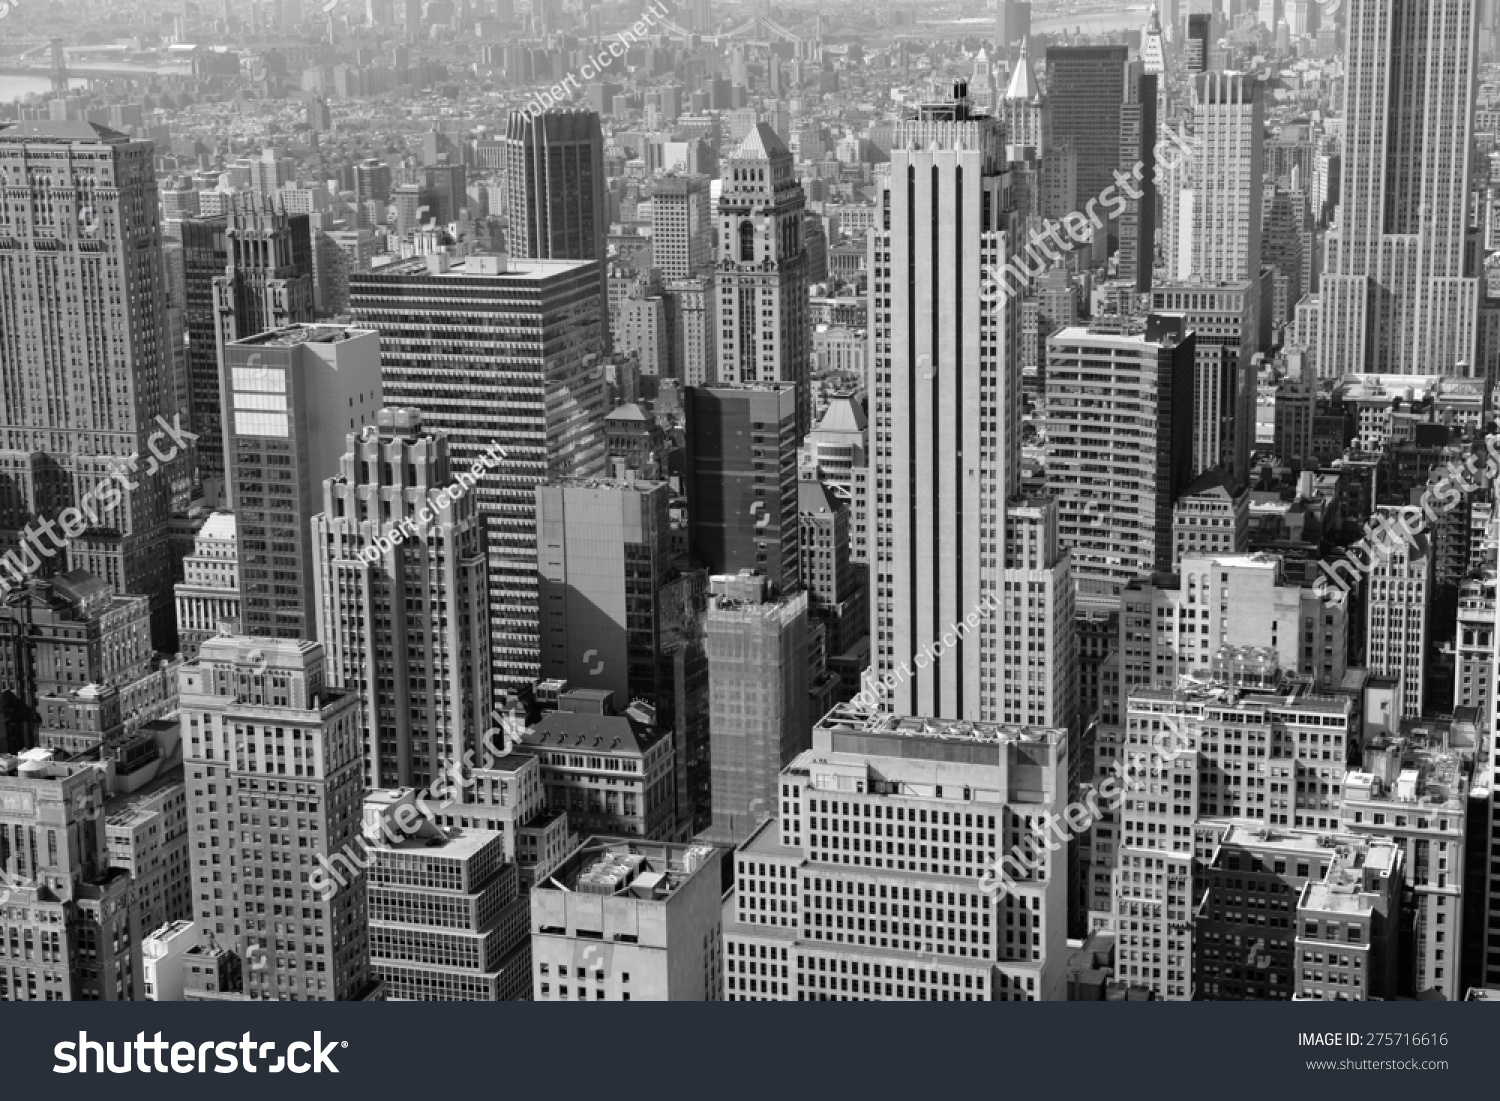 Cityscape of skyscrapers and buildings with Manhattan skyline in New York City #275716616